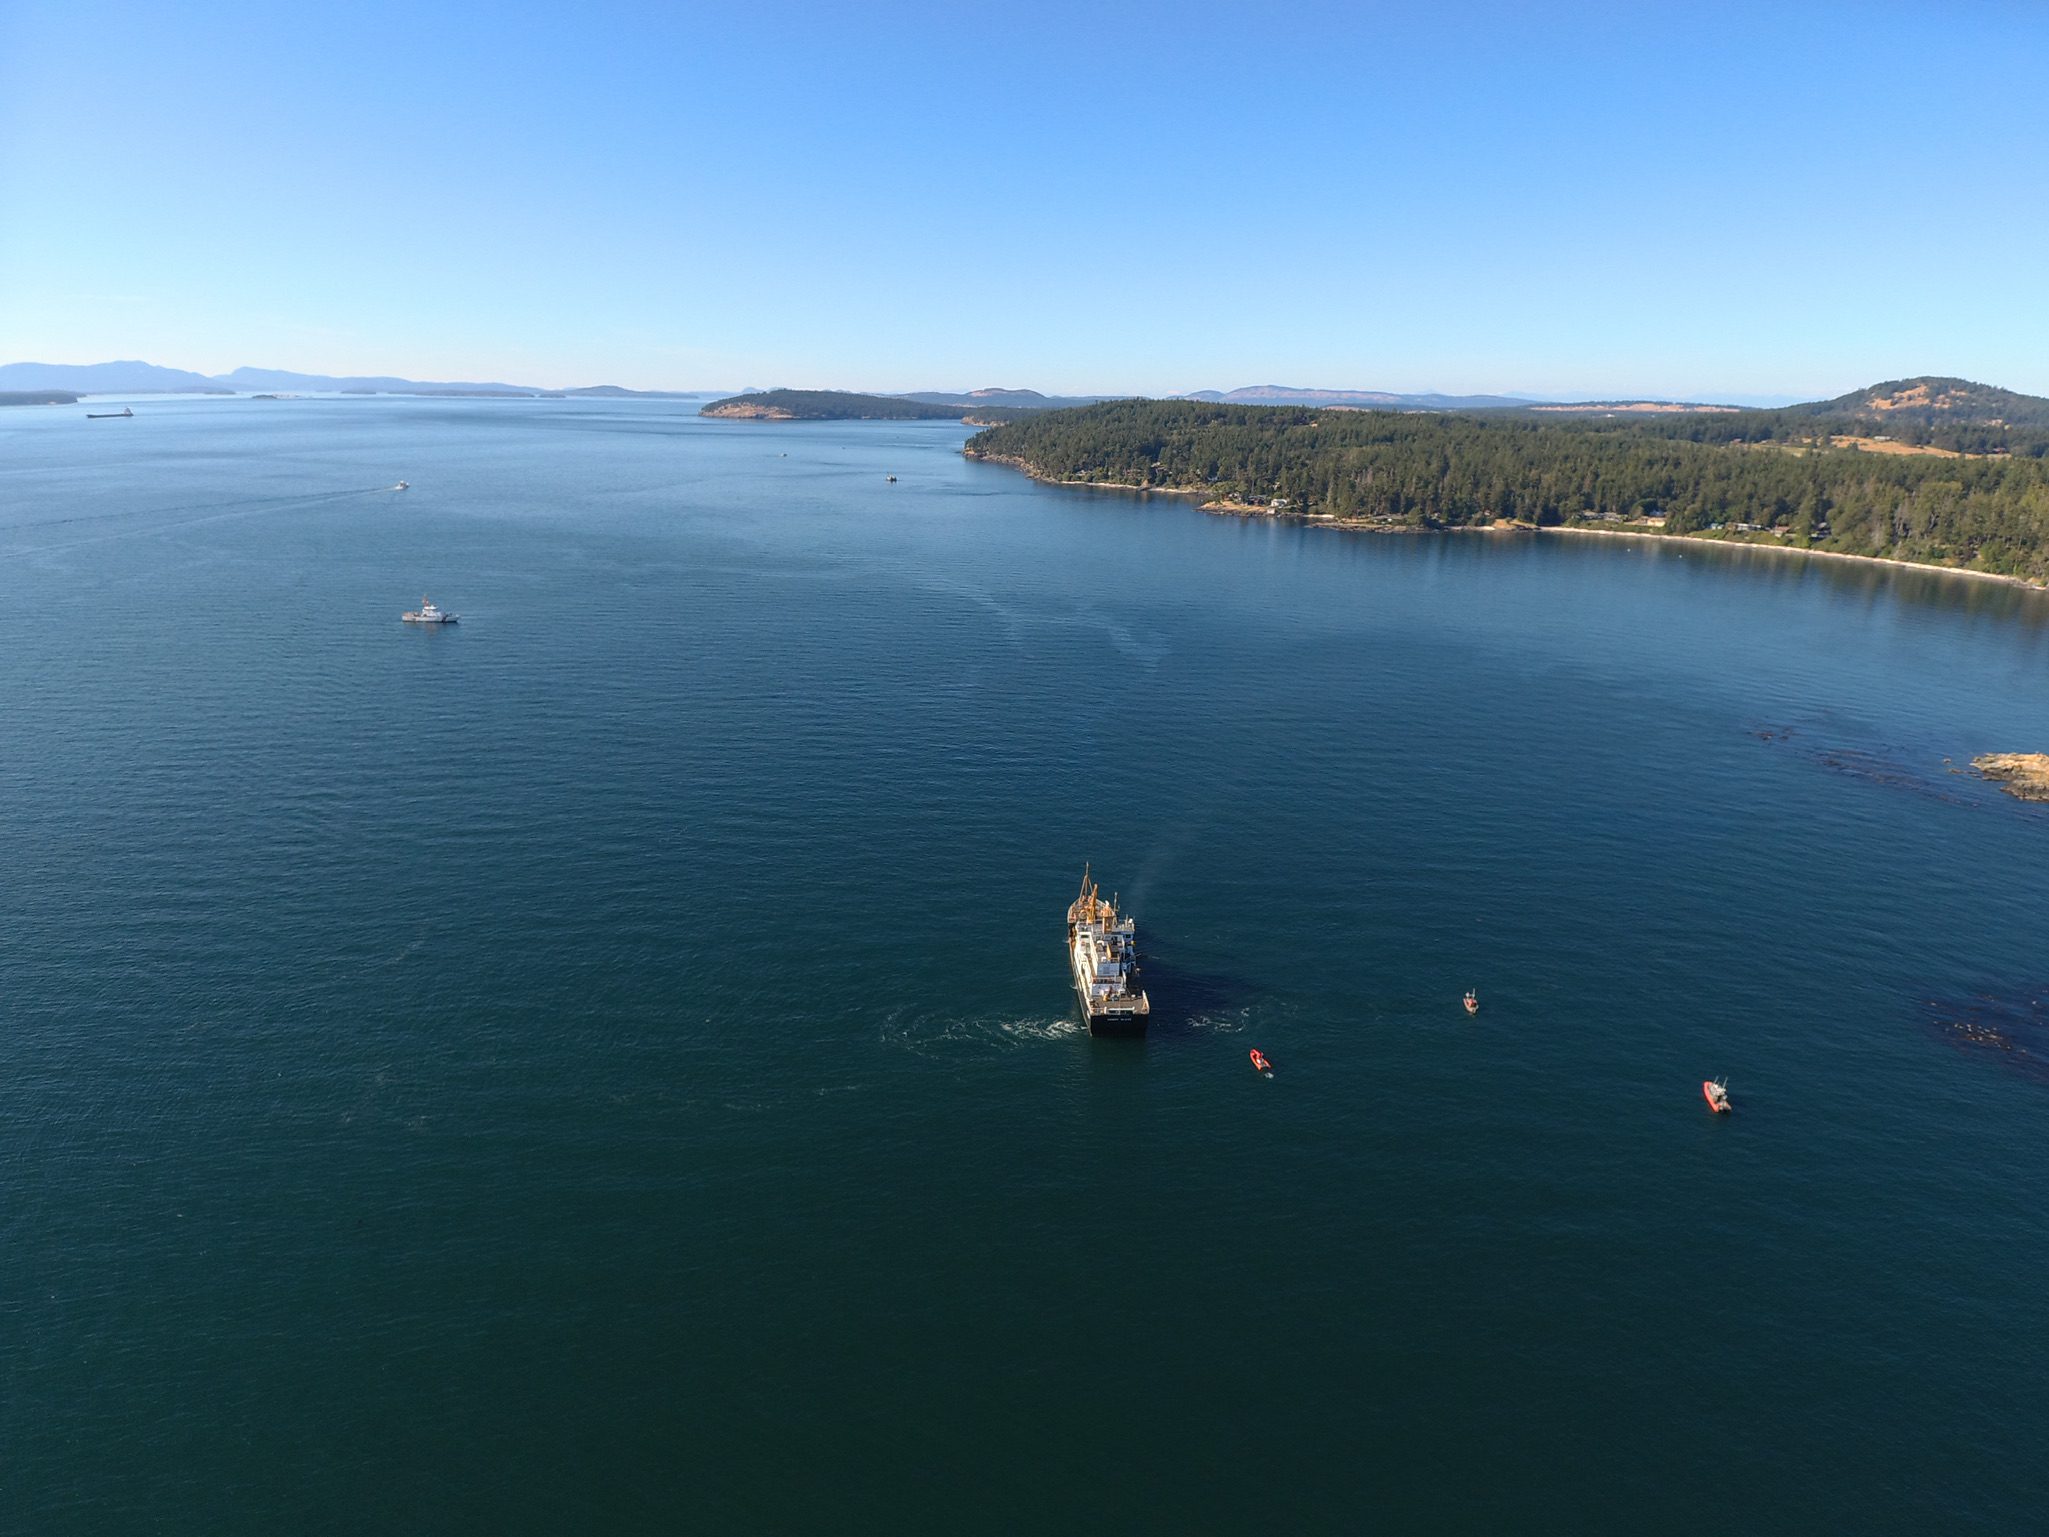 Oil Spill Response Continues for Sunken Fishing Vessel in Washington